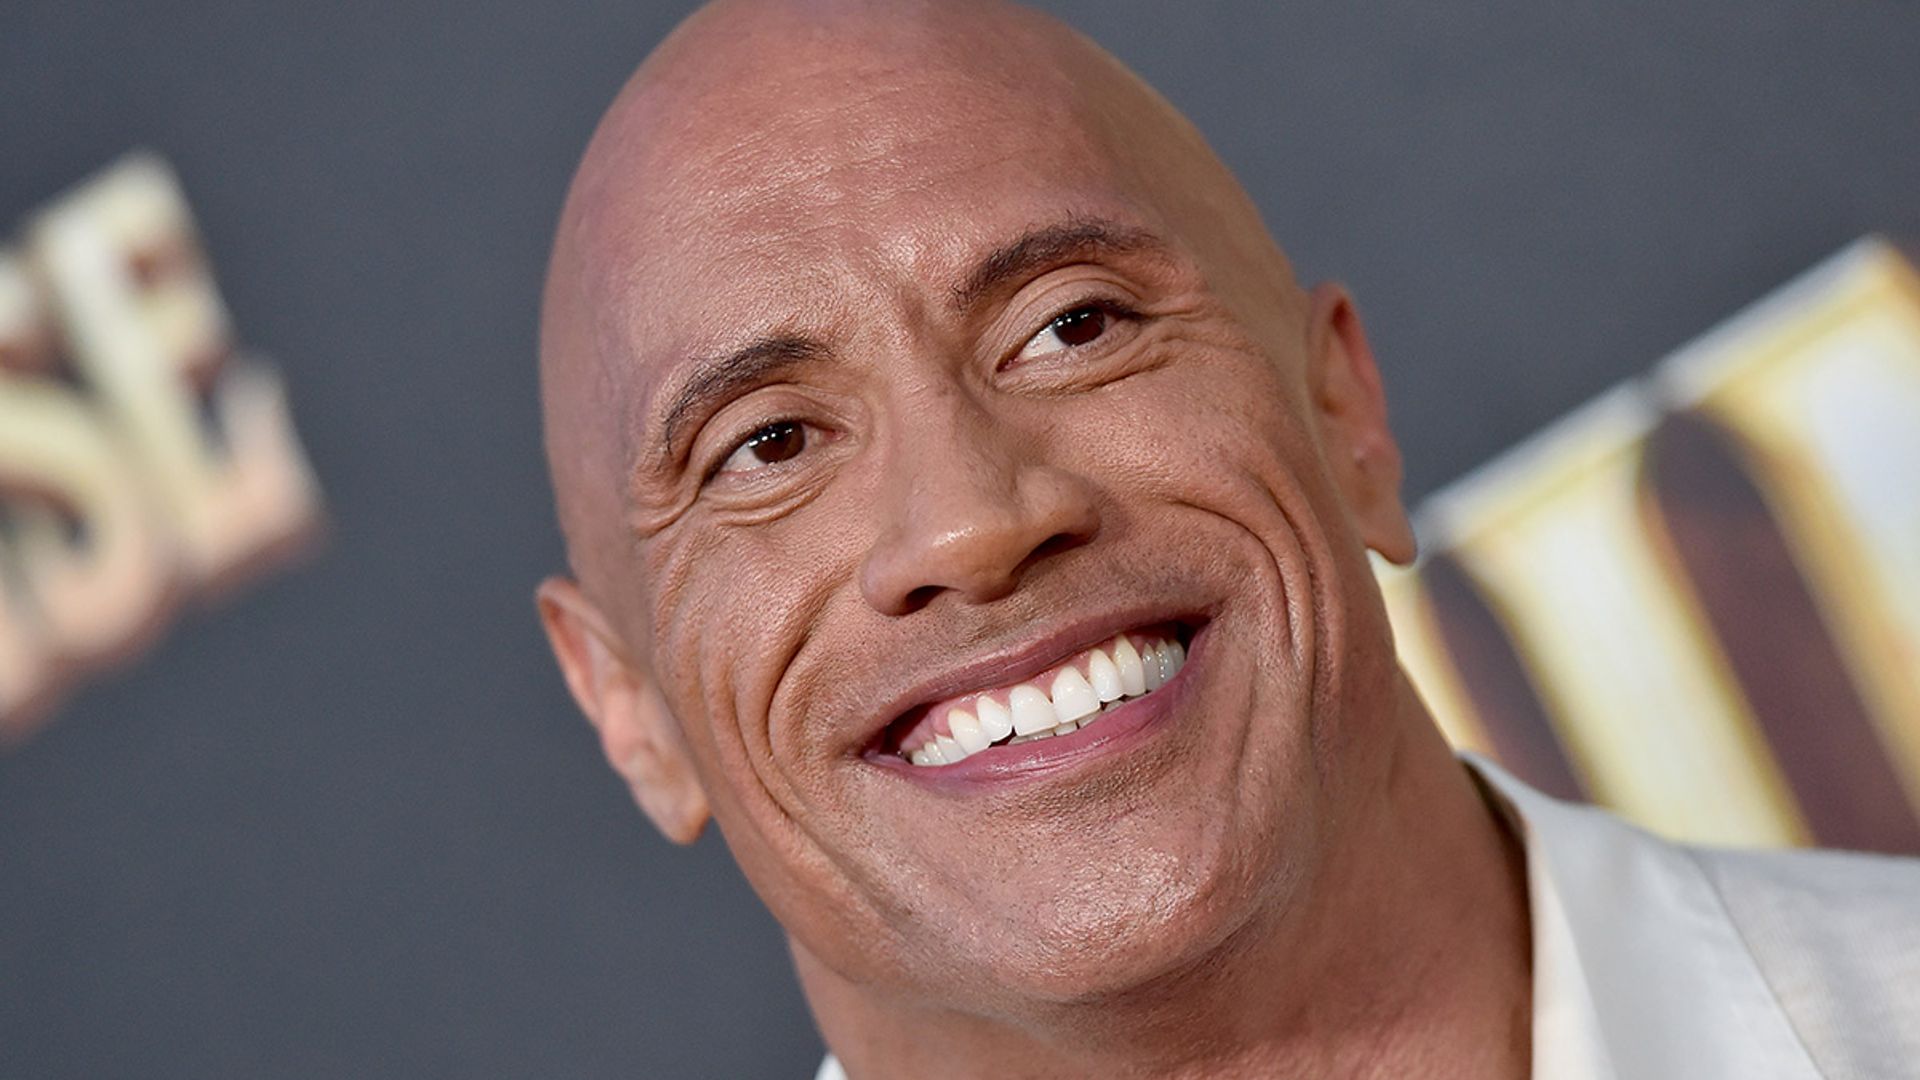 Dwayne Johnson shares hilarious video of daughter to mark her birthday